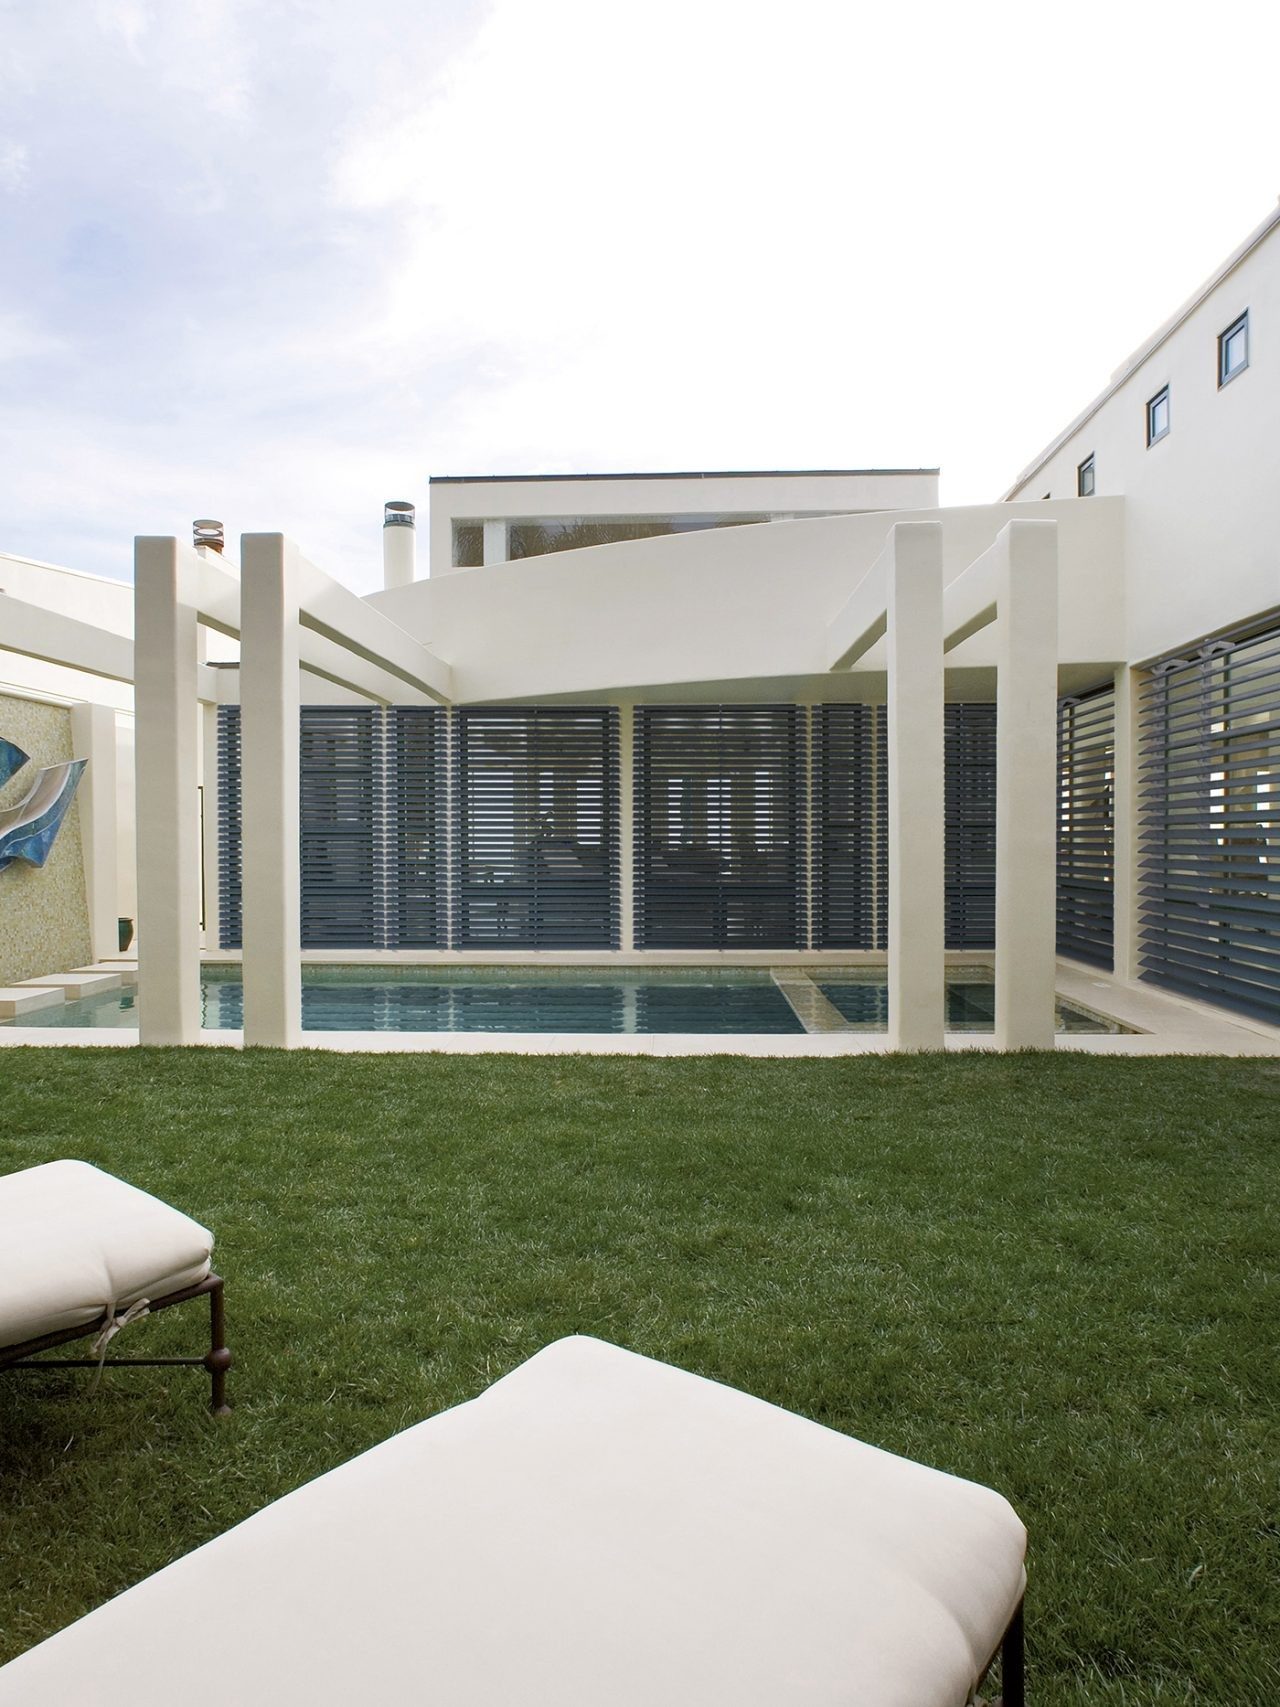 Outdoor pool area enclosed with aluminium shutters